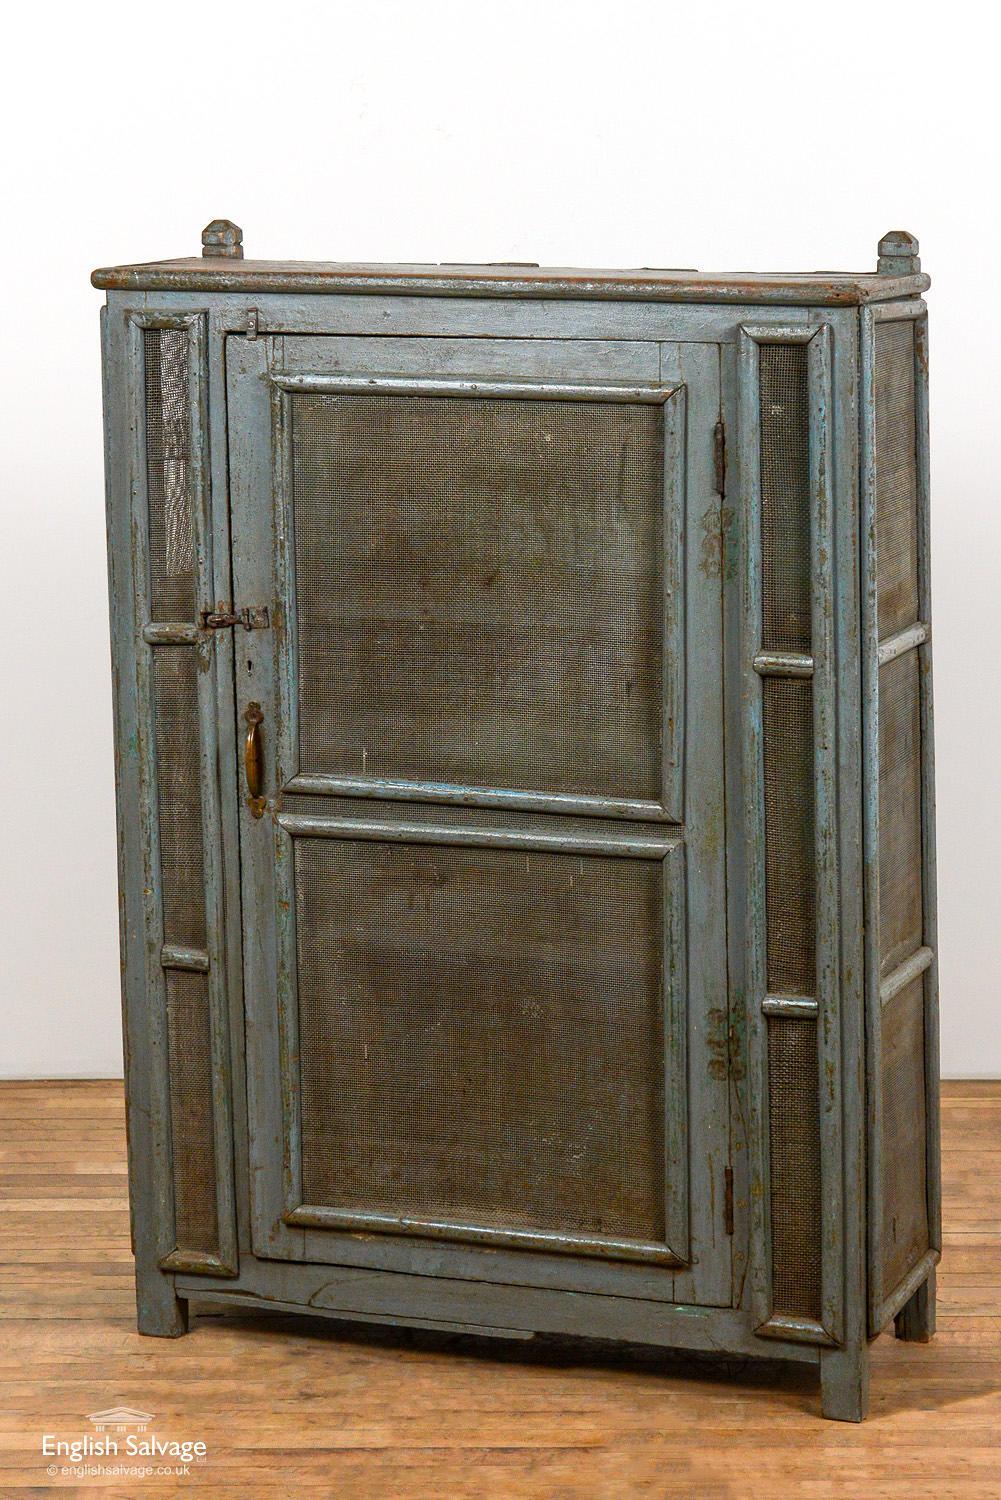 Rustic wooden painted freestanding cabinet with planked shelves and mesh to the front and sides, making it ideal as storage in a pantry or kitchen. Chips, bumps and knock commensurate with age and style of the storage unit.